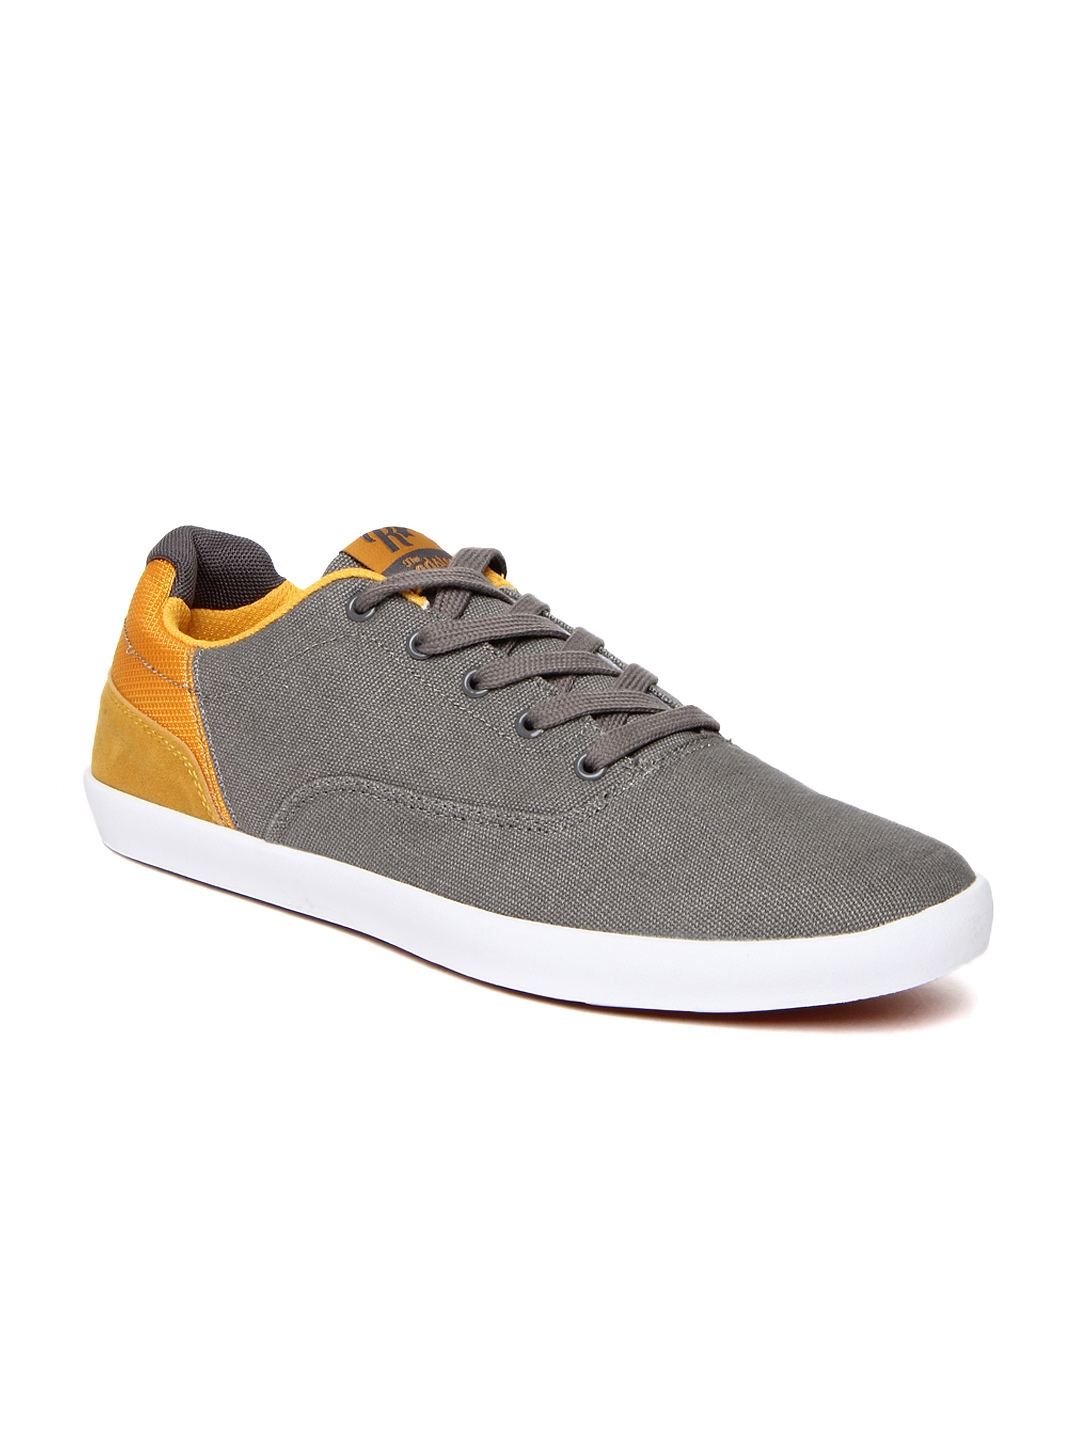 Buy Roadster Men Grey Casual Shoes - Casual Shoes for Men 346064 | Myntra